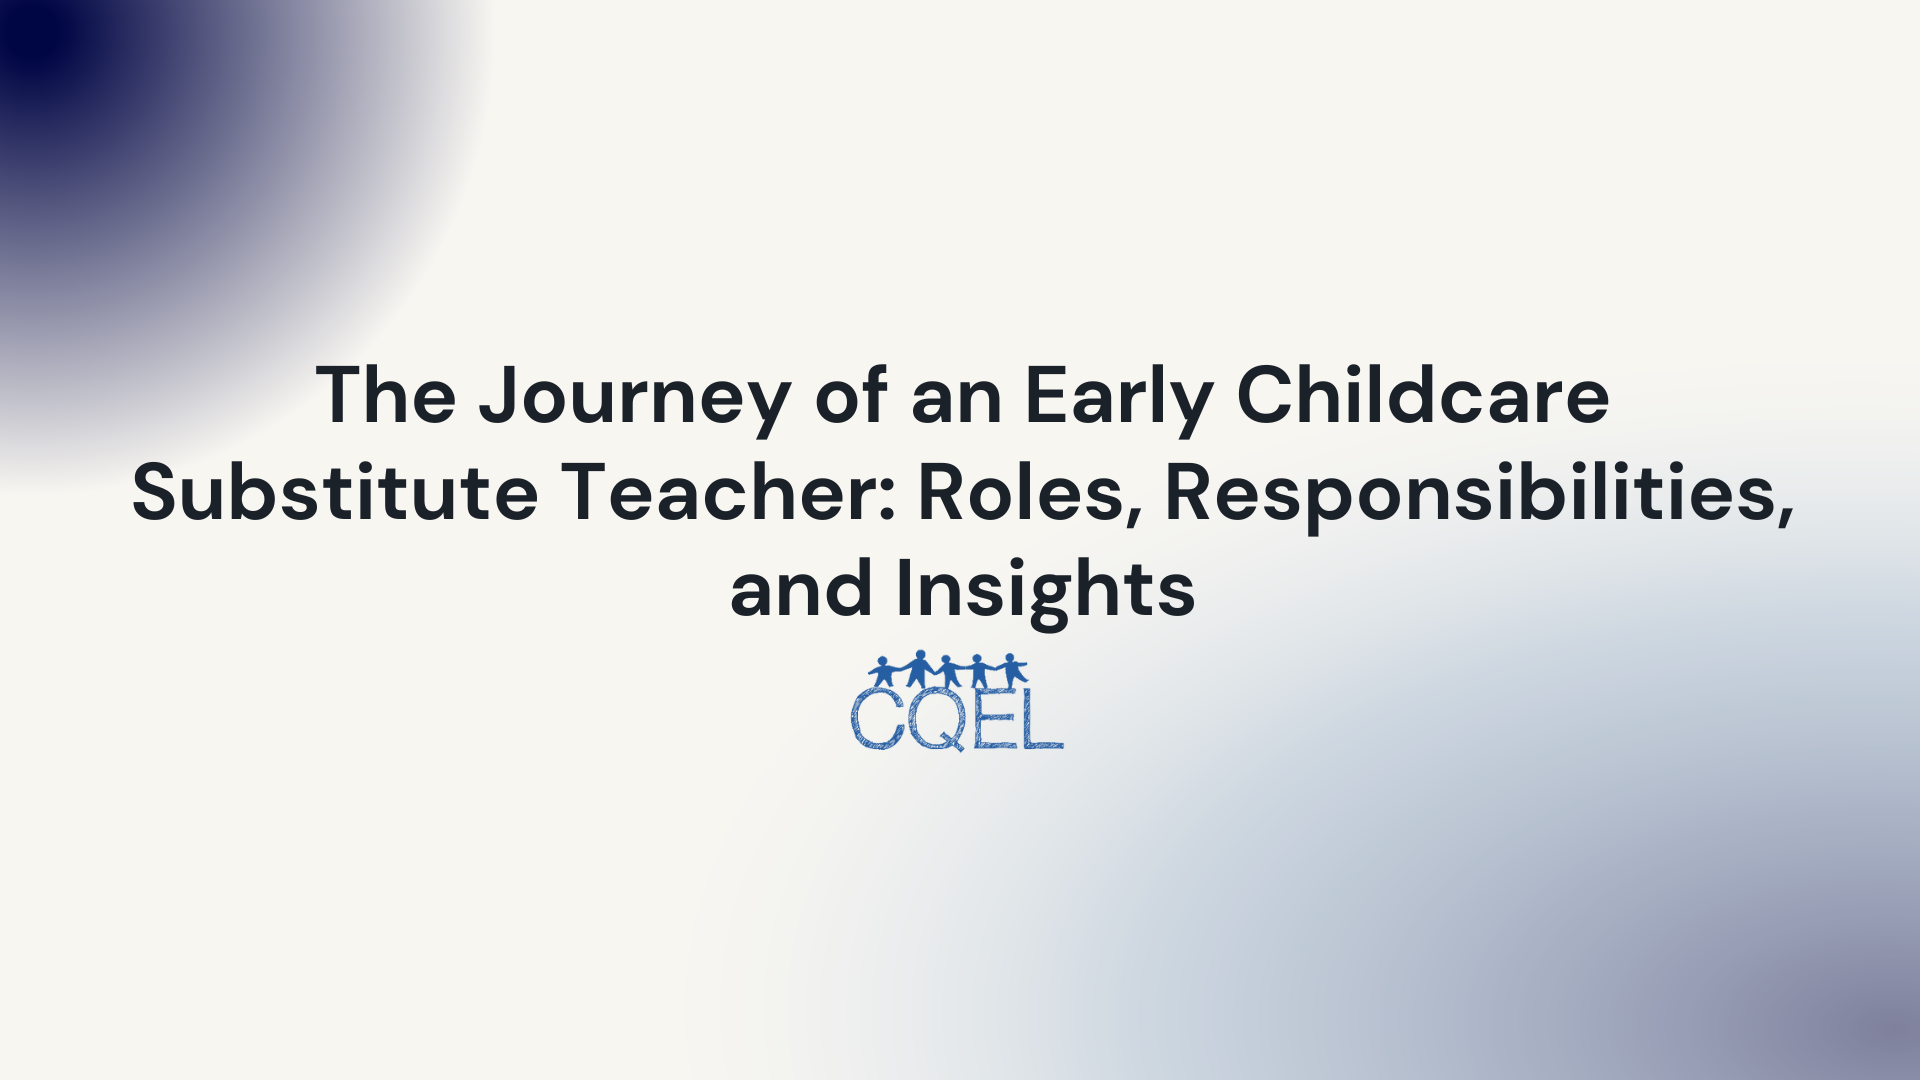 The Journey of an Early Childcare Substitute Teacher: Roles, Responsibilities, and Insights